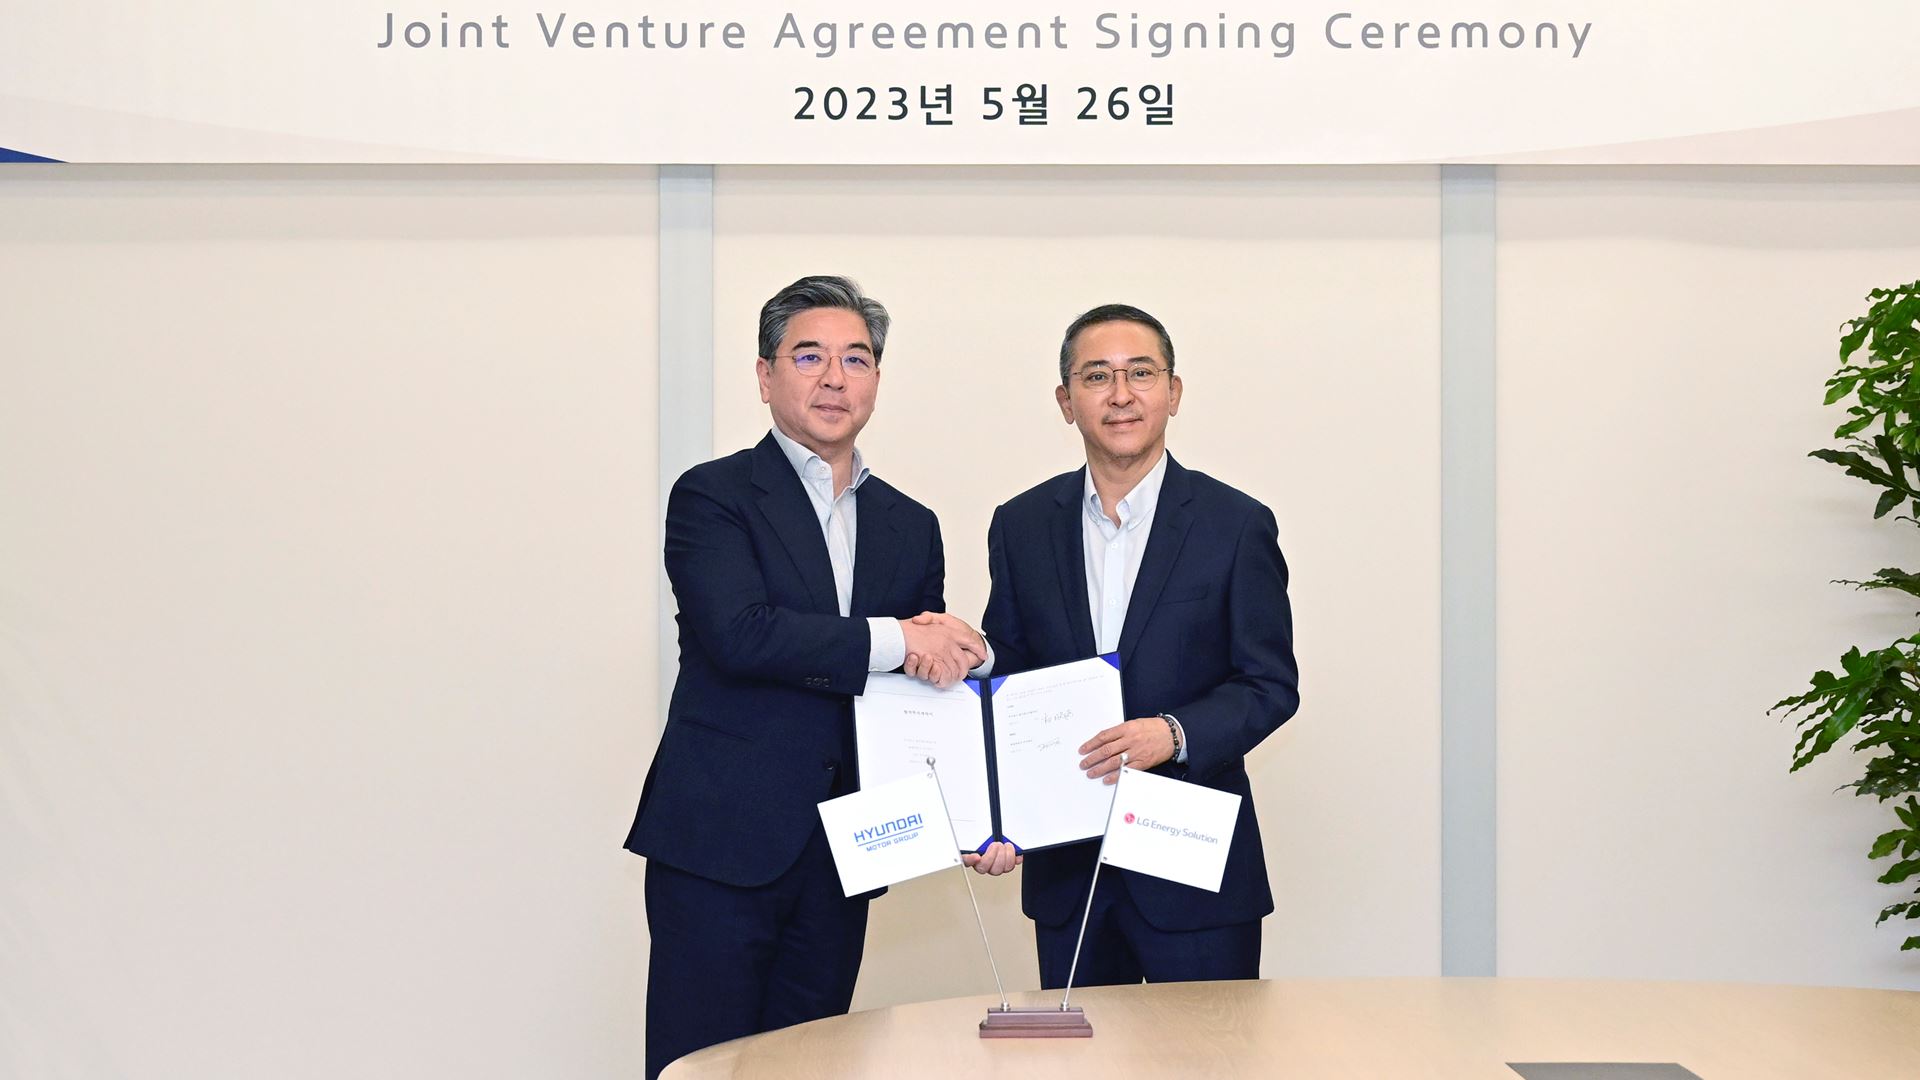 Hyundai Motor Group and LG Energy Solution to Establish Battery Cell Manufacturing Joint Venture in the U.S.